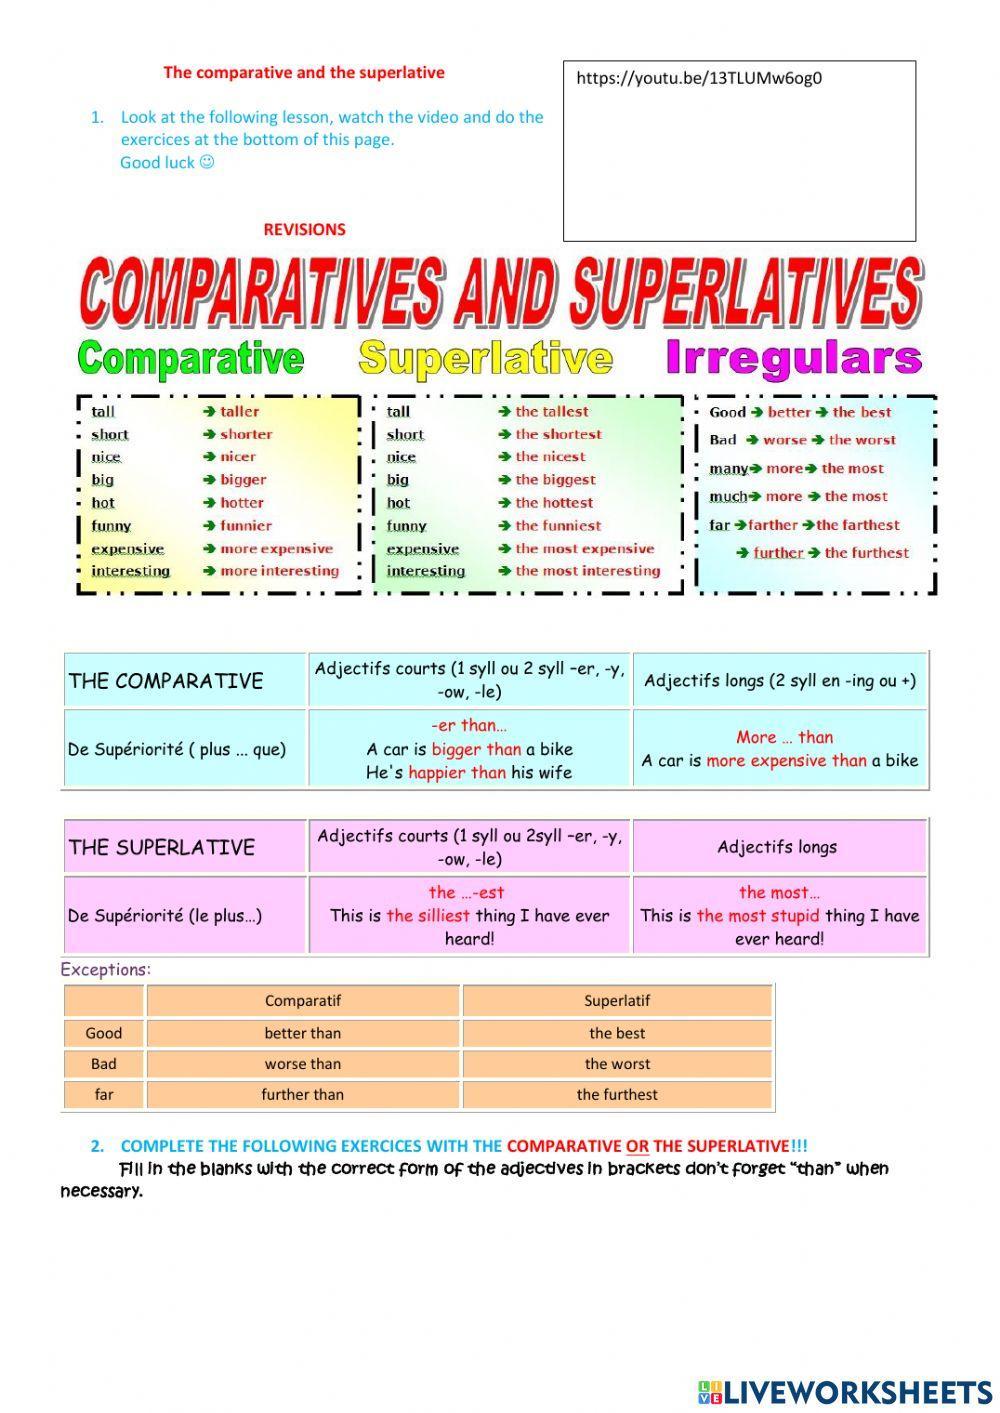 The comparative and the superlative